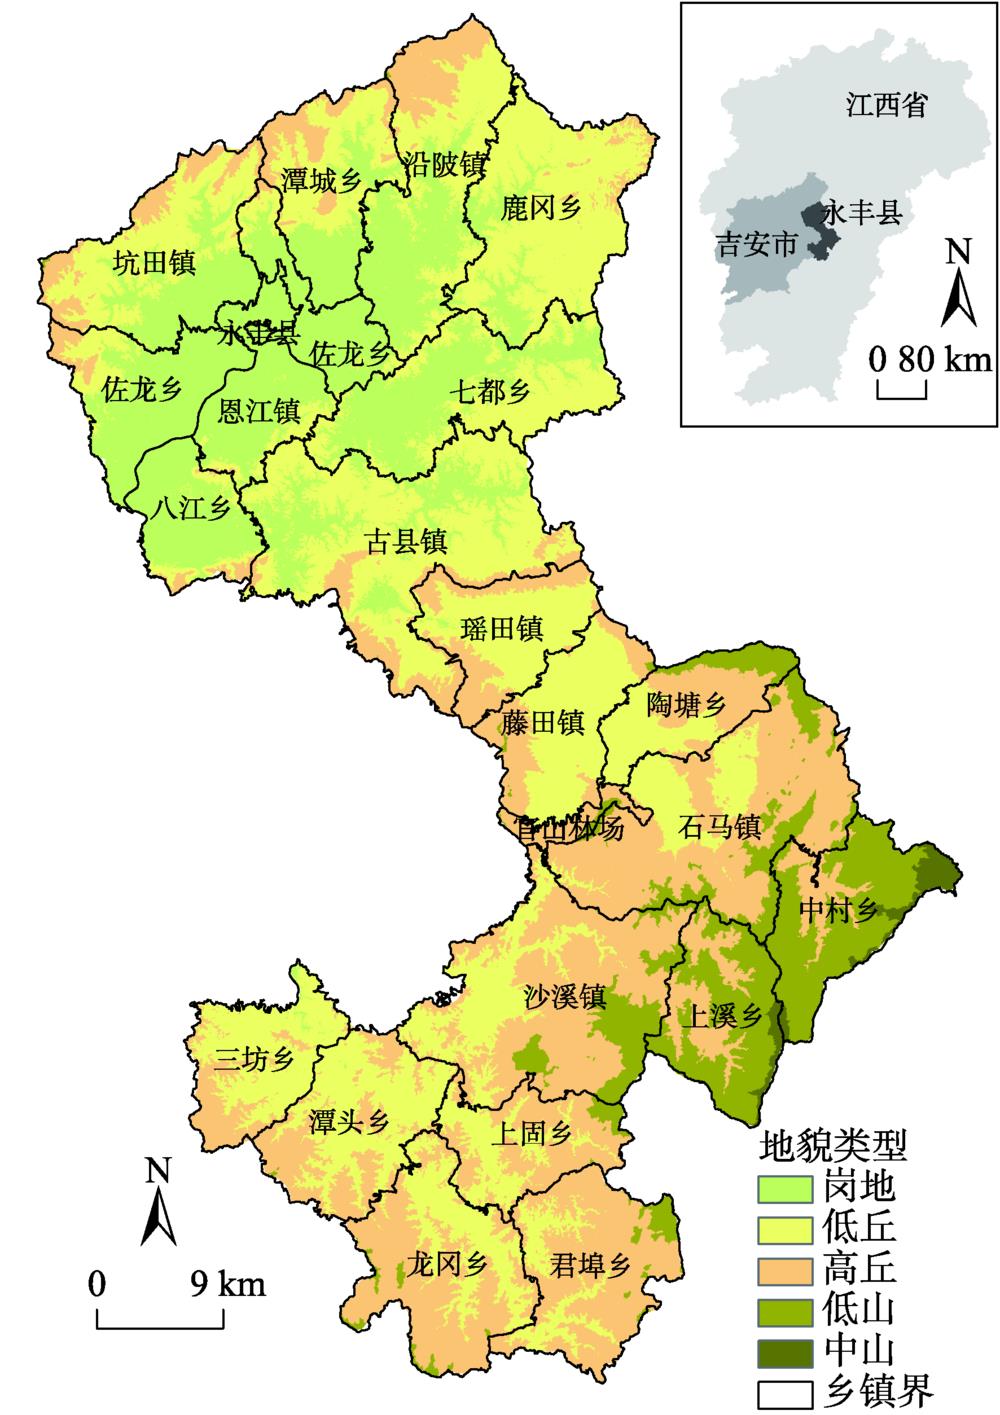 Location, administrative division, and topographic map of Yongfeng County